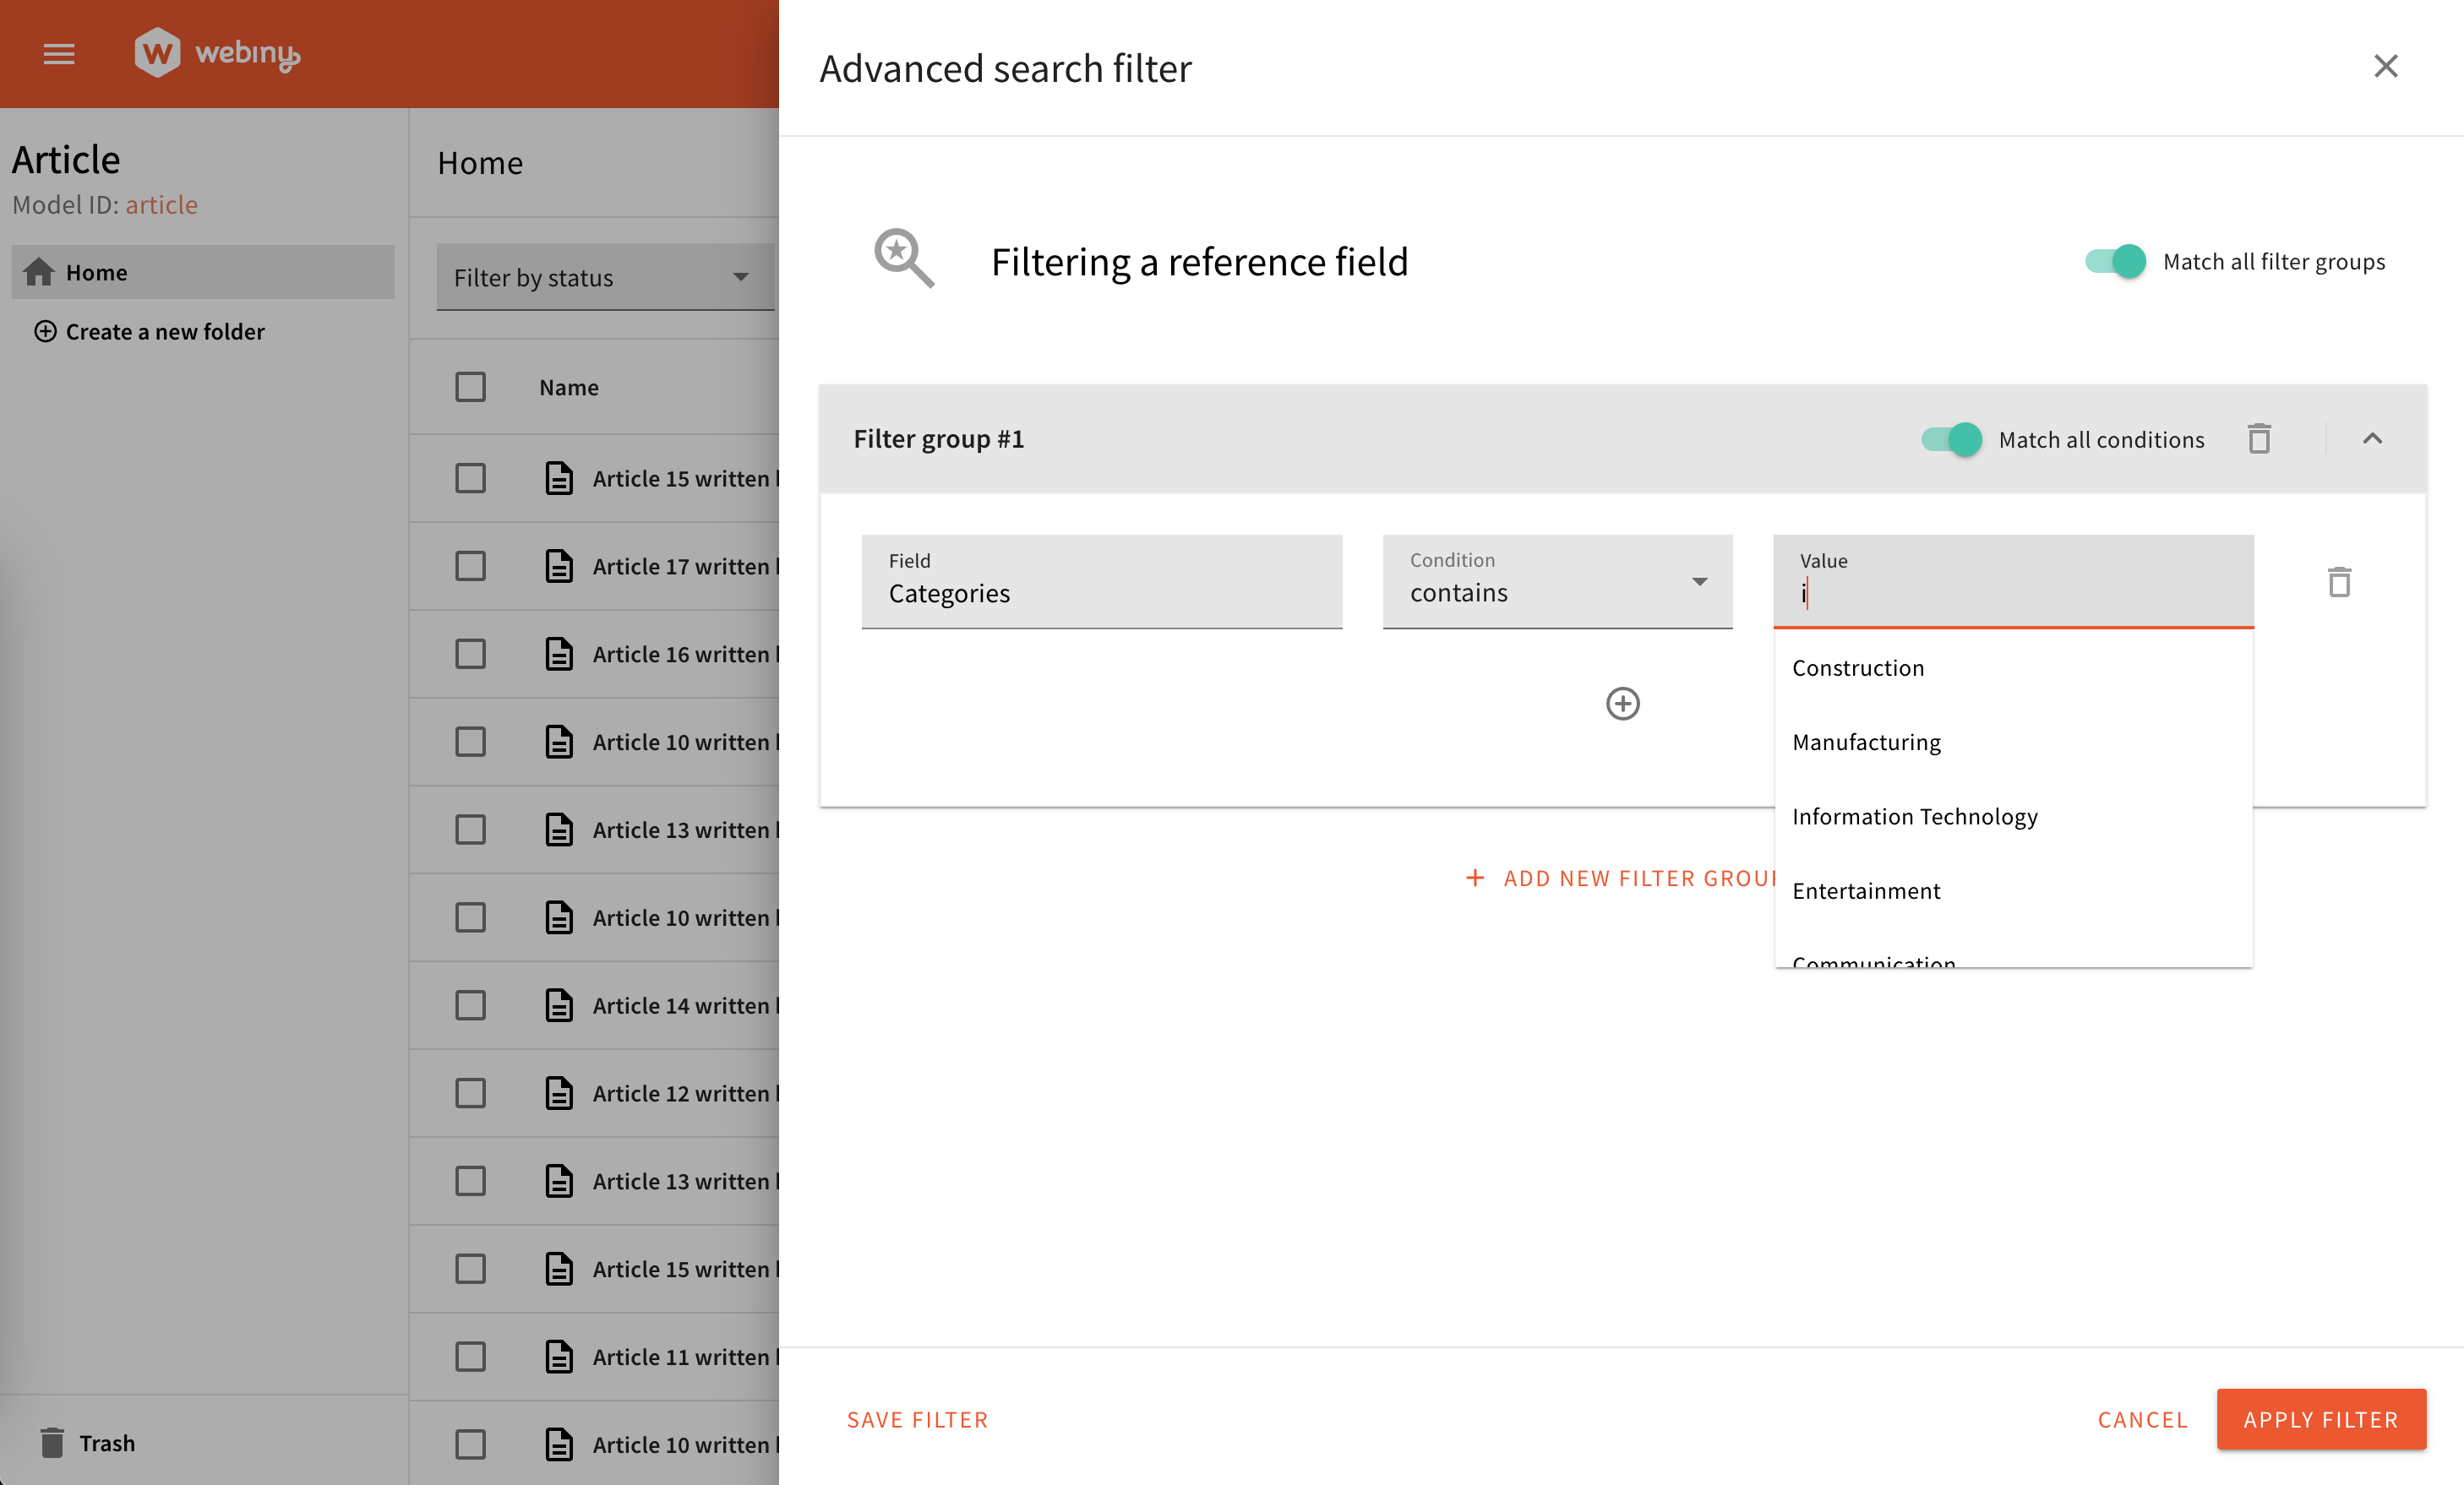 Advanced Search Filter's support for reference fields